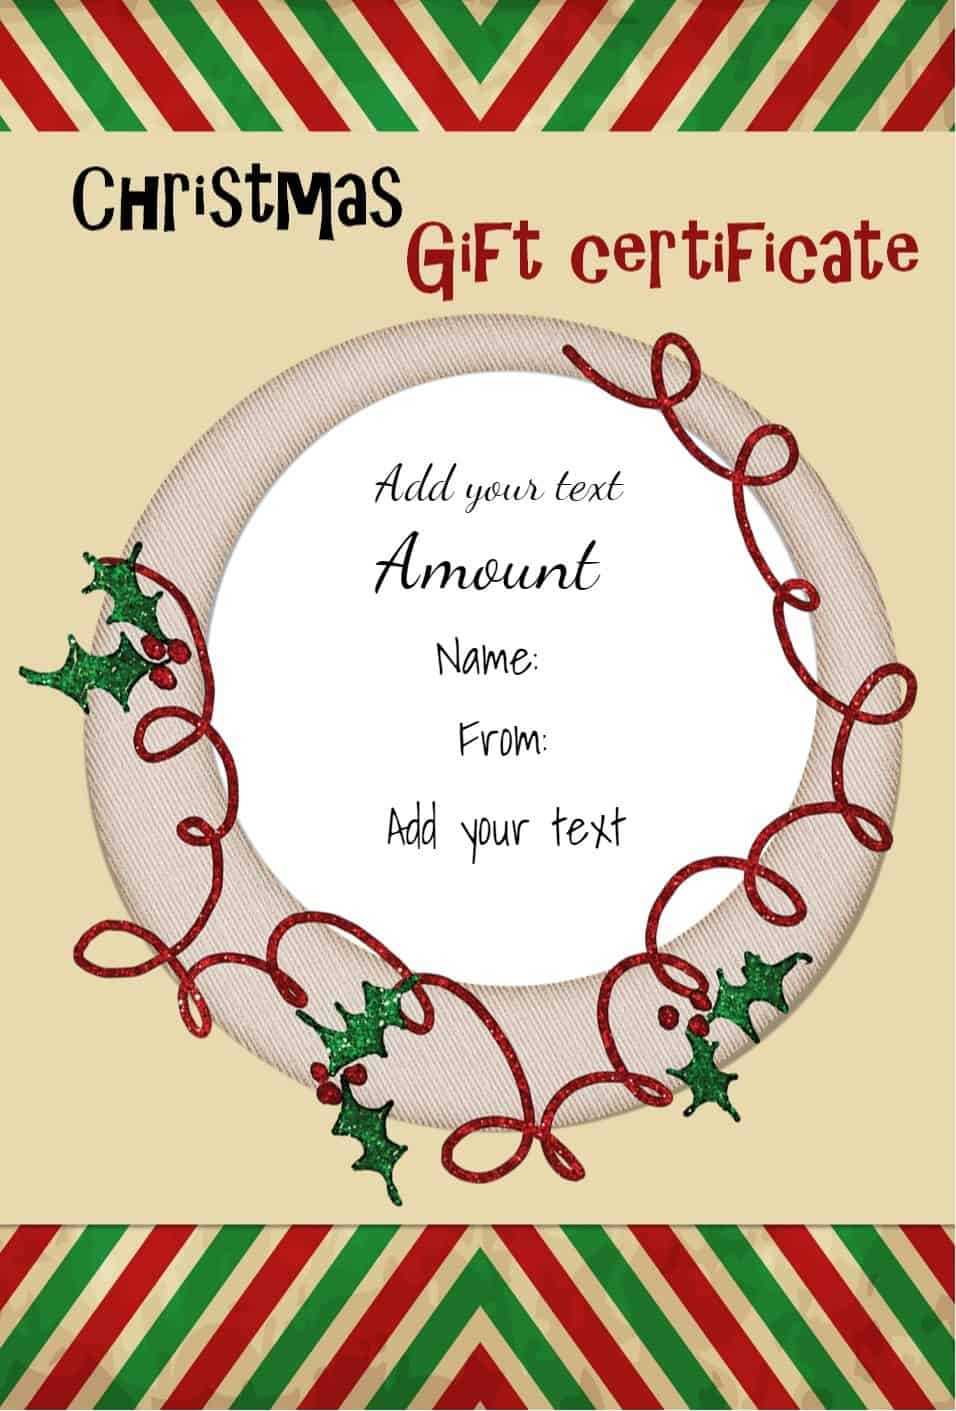 Free Christmas Gift Certificate Template | Customize Online With Christmas Gift Certificate Template Free Download